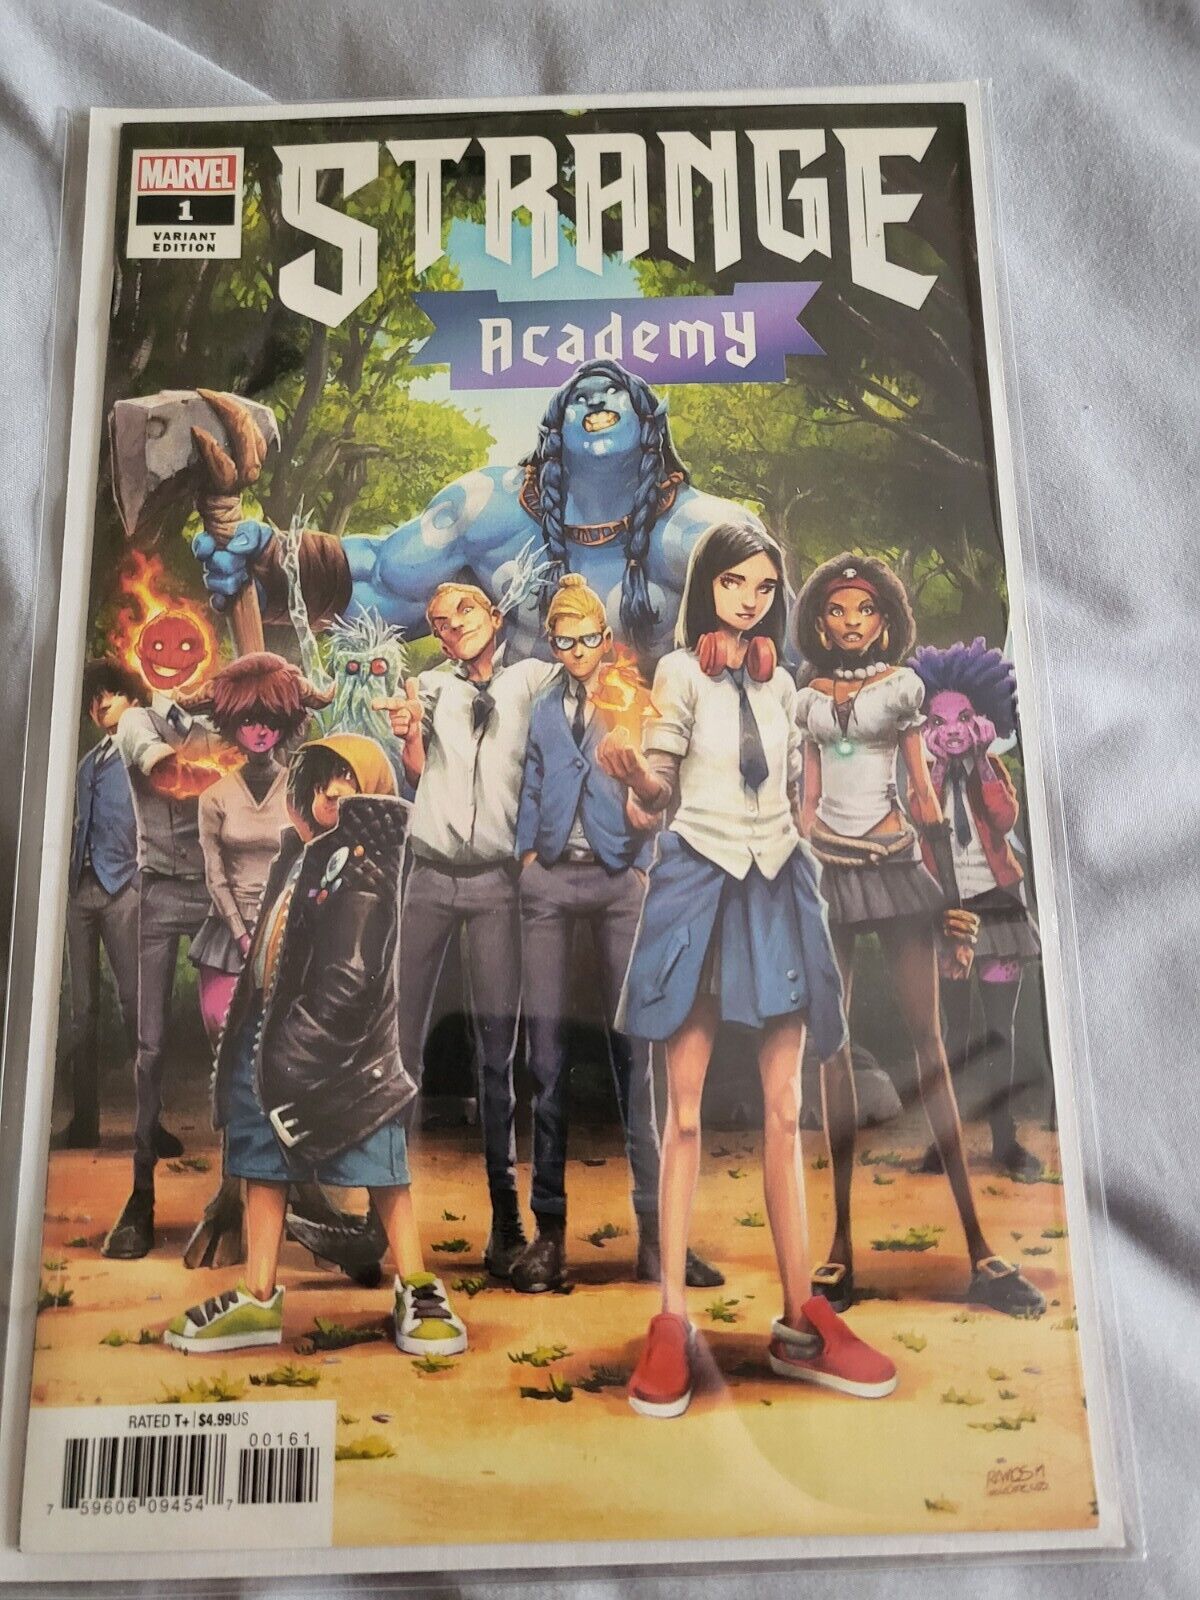 STRANGE ACADEMY #1 1:25 VARIANT RAMOS RETAIL INCENTIVE MULTIPLE 1ST APPEARANCES